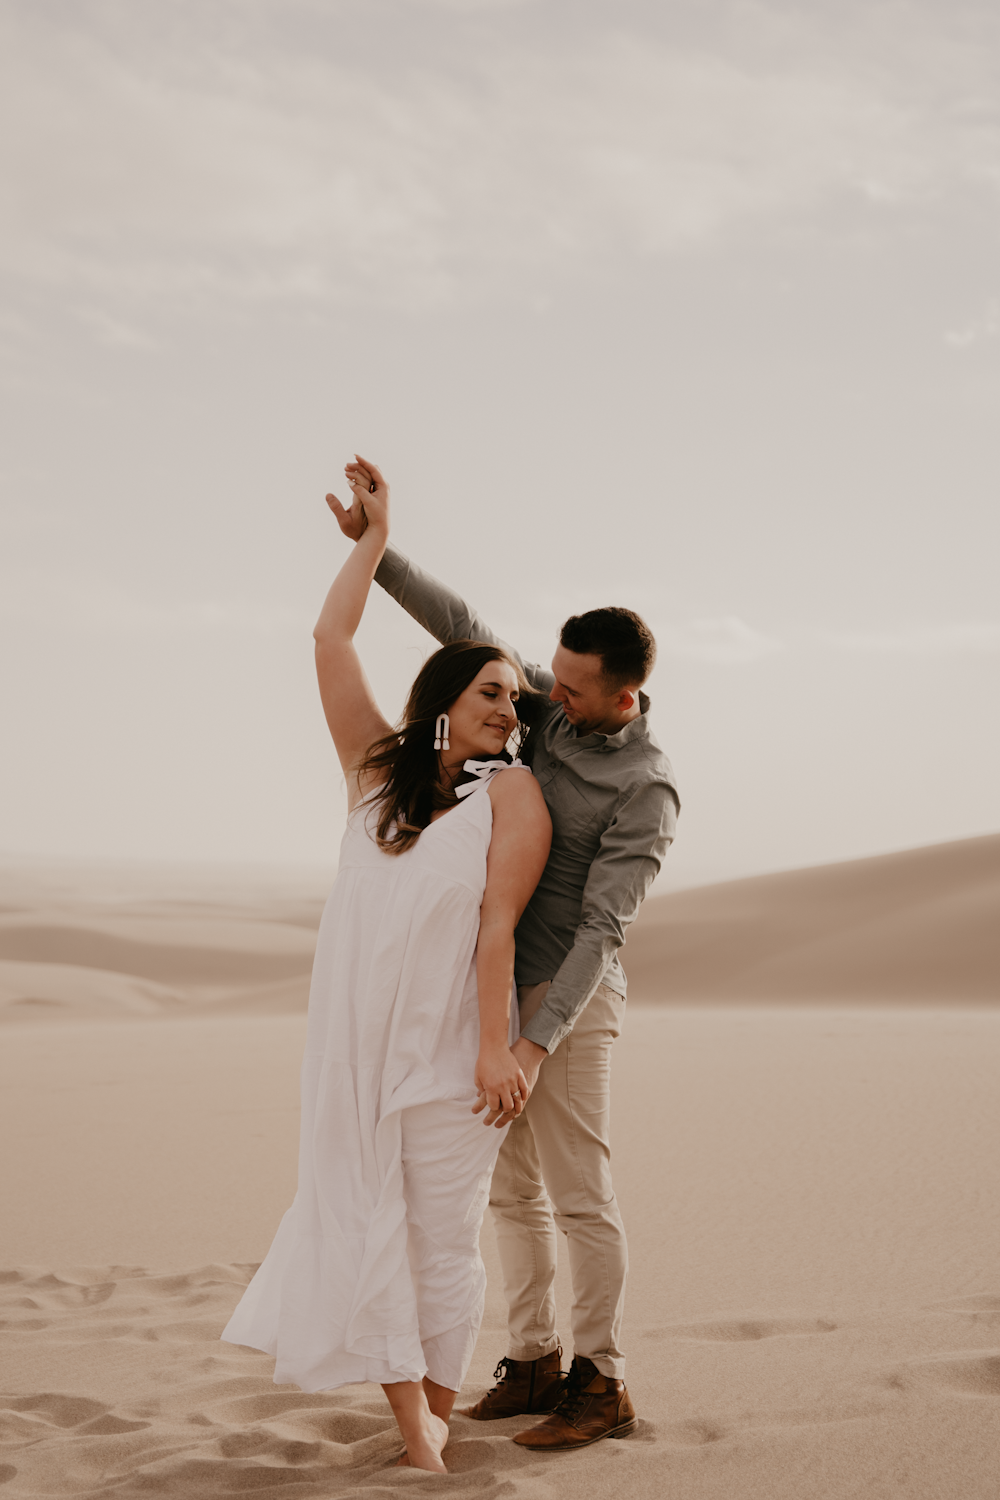 a man and woman dancing in the desert